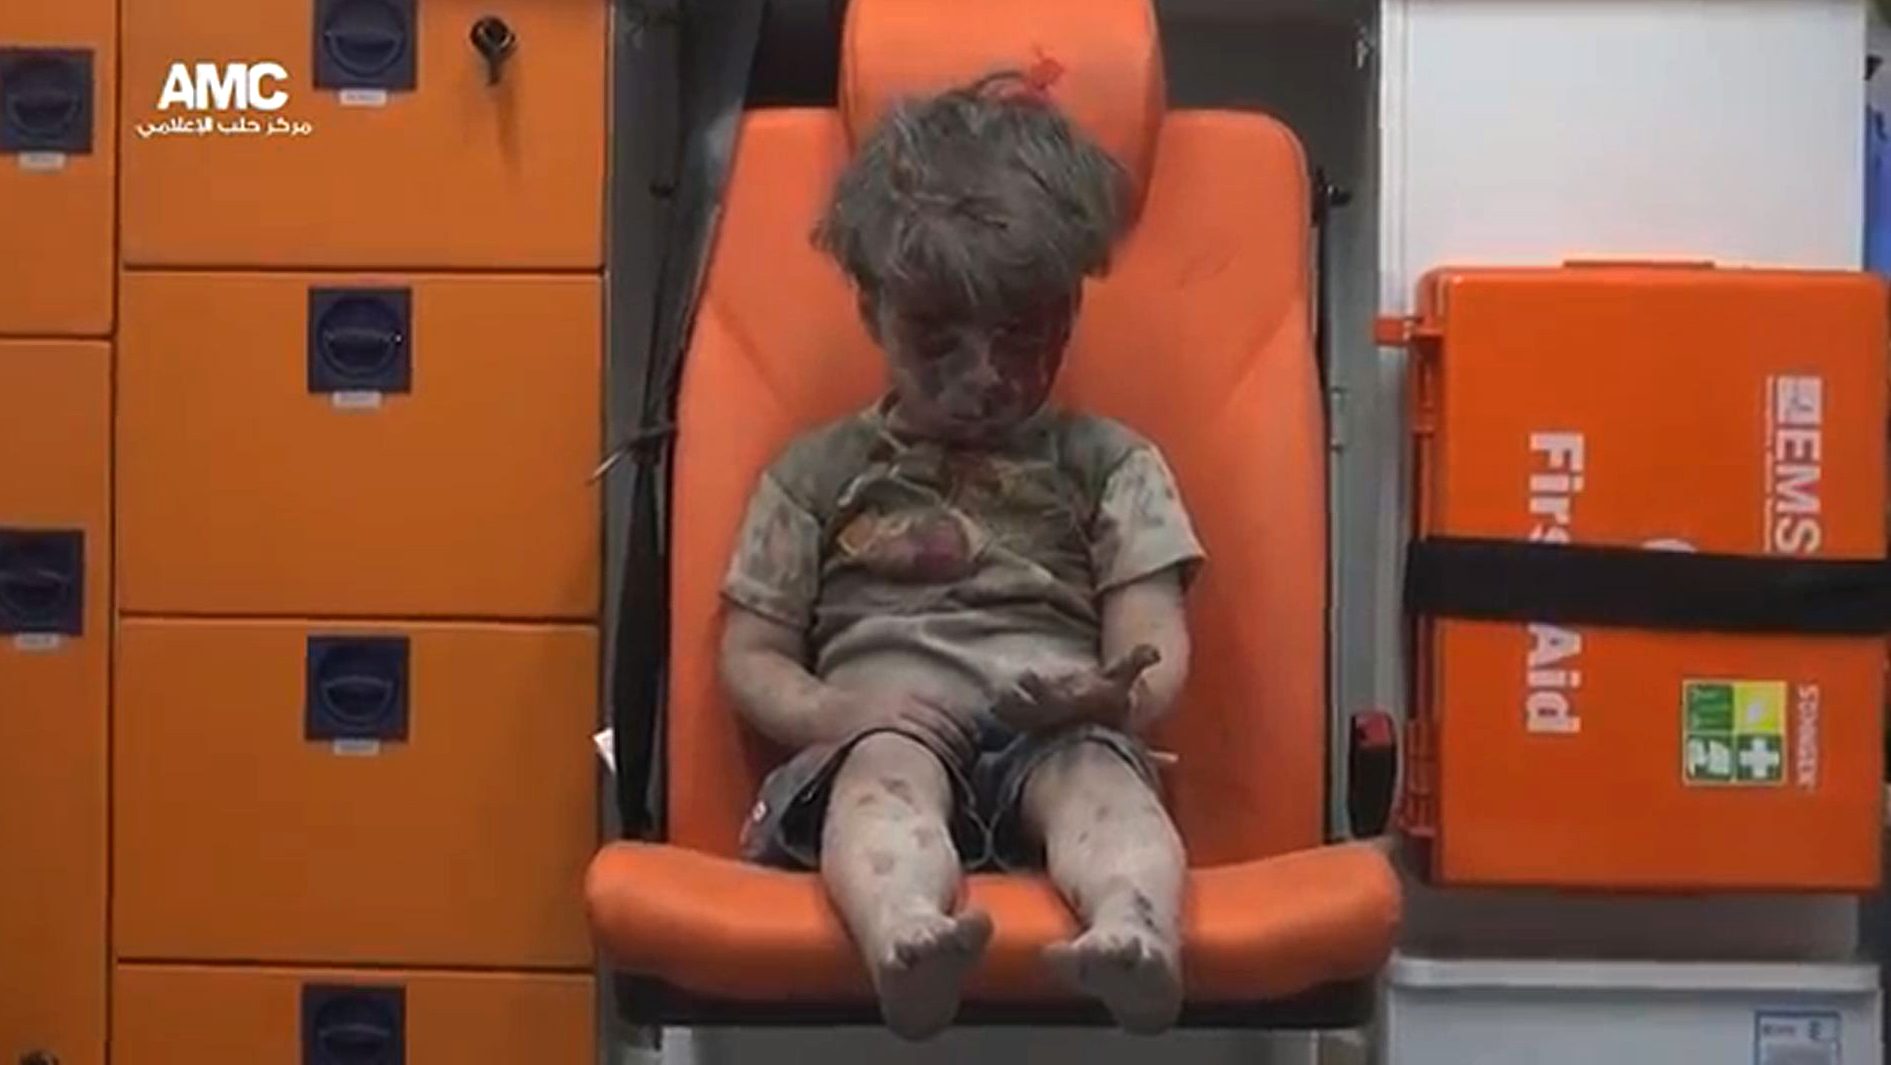 An image grab taken from a video uploaded by the Syrian opposition's activist group Aleppo Media Centre (AMC) on August 17, 2016 is said to show Omran, a four-year-old Syrian boy covered in dust and blood, looking at his hand in shock as he sits in an ambulance after being rescued from the rubble of a building hit by an air strike in the rebel-held Qaterji neighbourhood of the northern Syrian city of Aleppo. / AFP PHOTO / AMC / HO / === RESTRICTED TO EDITORIAL USE - MANDATORY CREDIT "AFP PHOTO / HO / AMC " - NO MARKETING NO ADVERTISING CAMPAIGNS - DISTRIBUTED AS A SERVICE TO CLIENTS FROM ALTERNATIVE SOURCES, AFP IS NOT RESPONSIBLE FOR ANY DIGITAL ALTERATIONS TO THE PICTURE'S EDITORIAL CONTENT, DATE AND LOCATION WHICH CANNOT BE INDEPENDENTLY VERIFIED ===   /